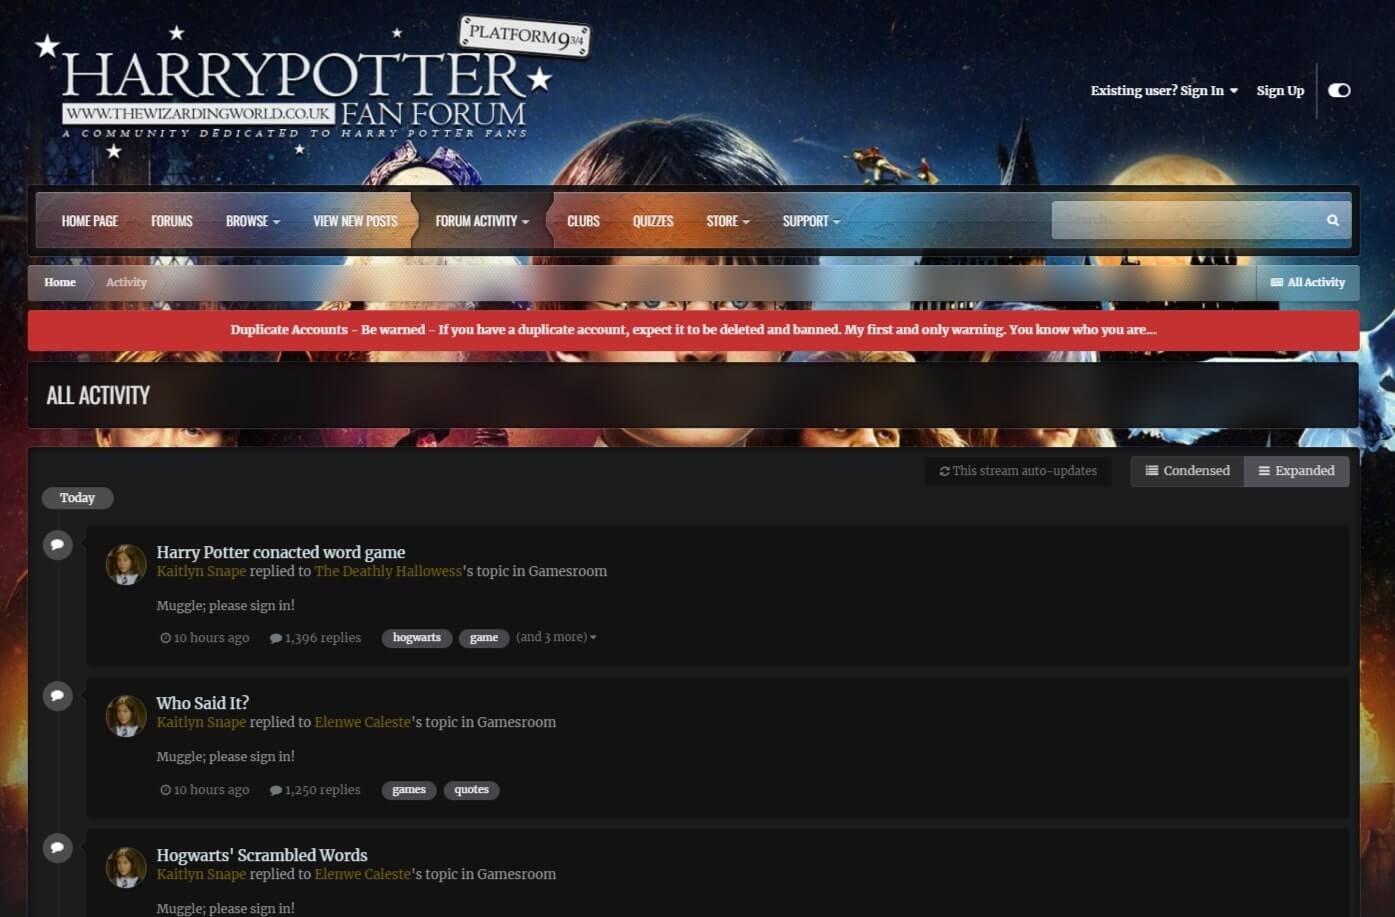 A screenshot of the Wizarding World page featuring the Harry Potter Fan forum page.